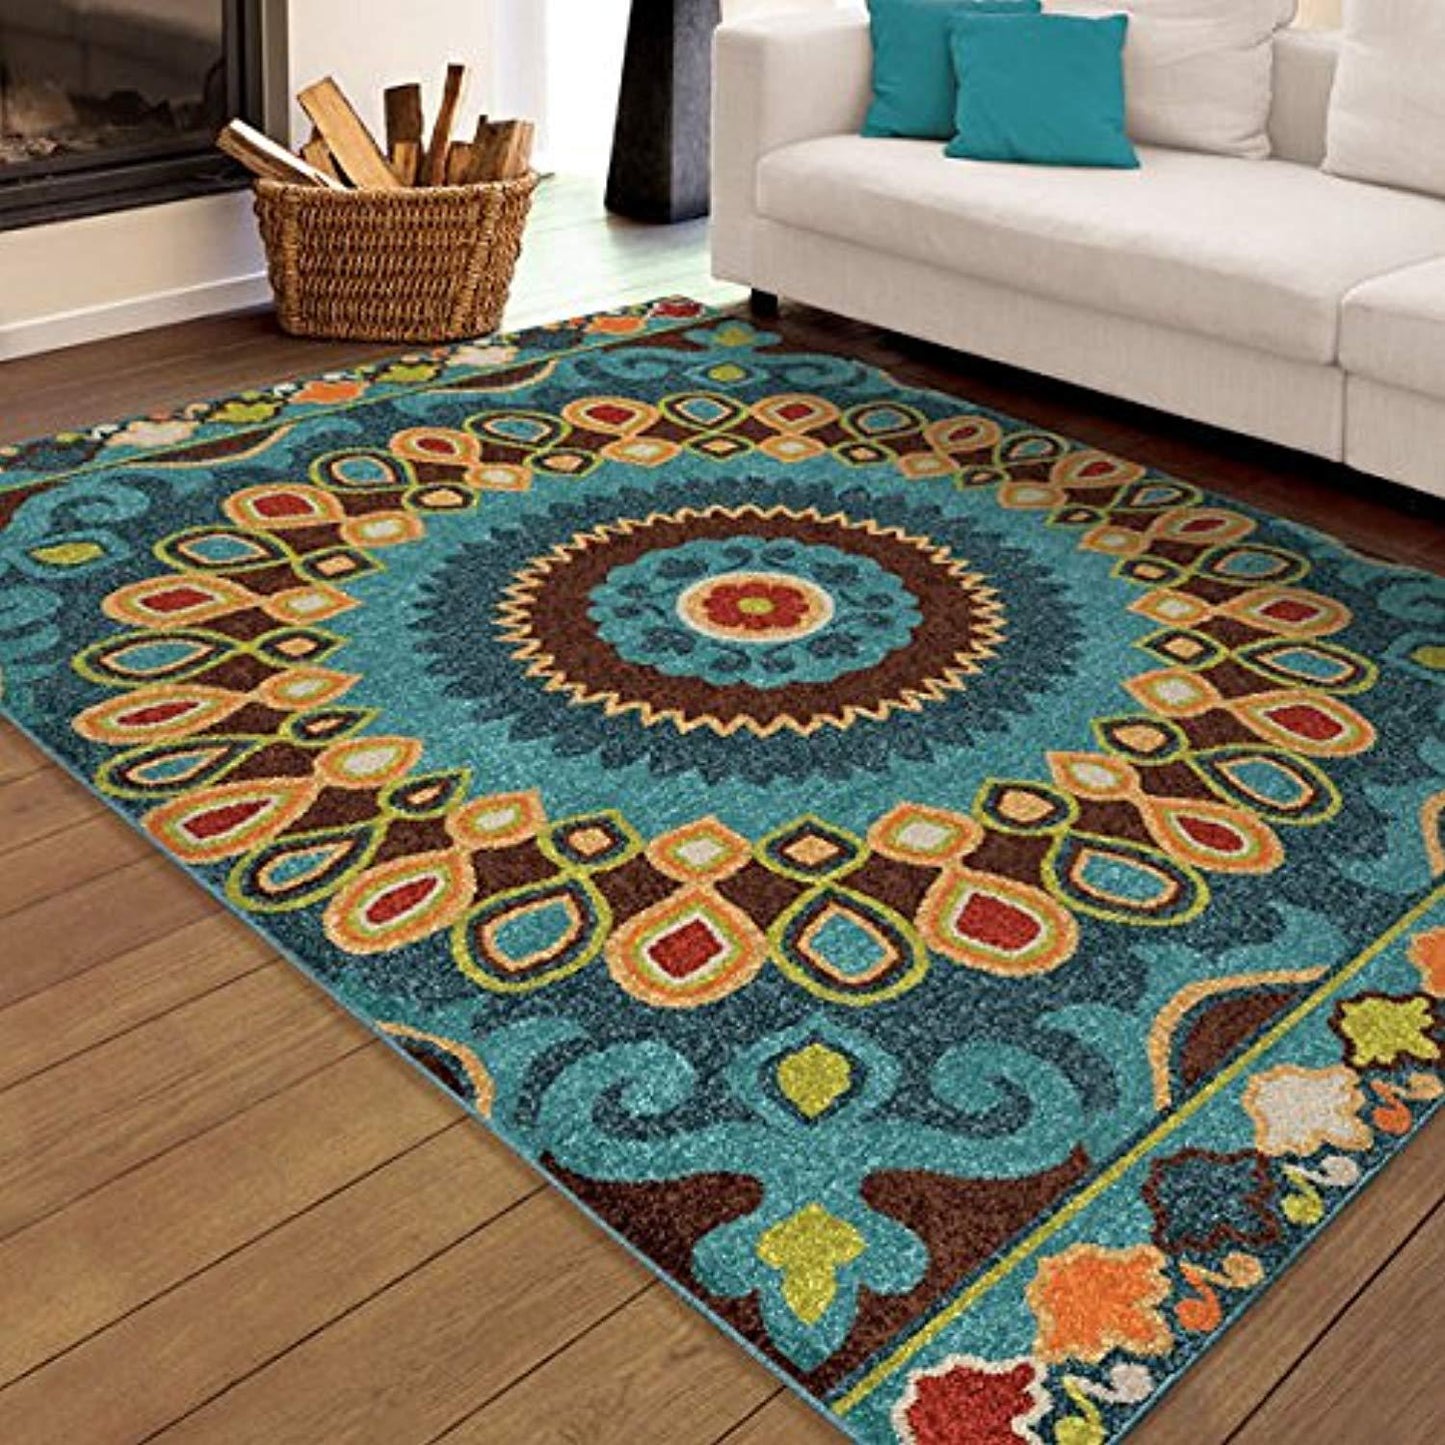 Contemporary Bohemian Indoor/Outdoor Stain Resistant Rug